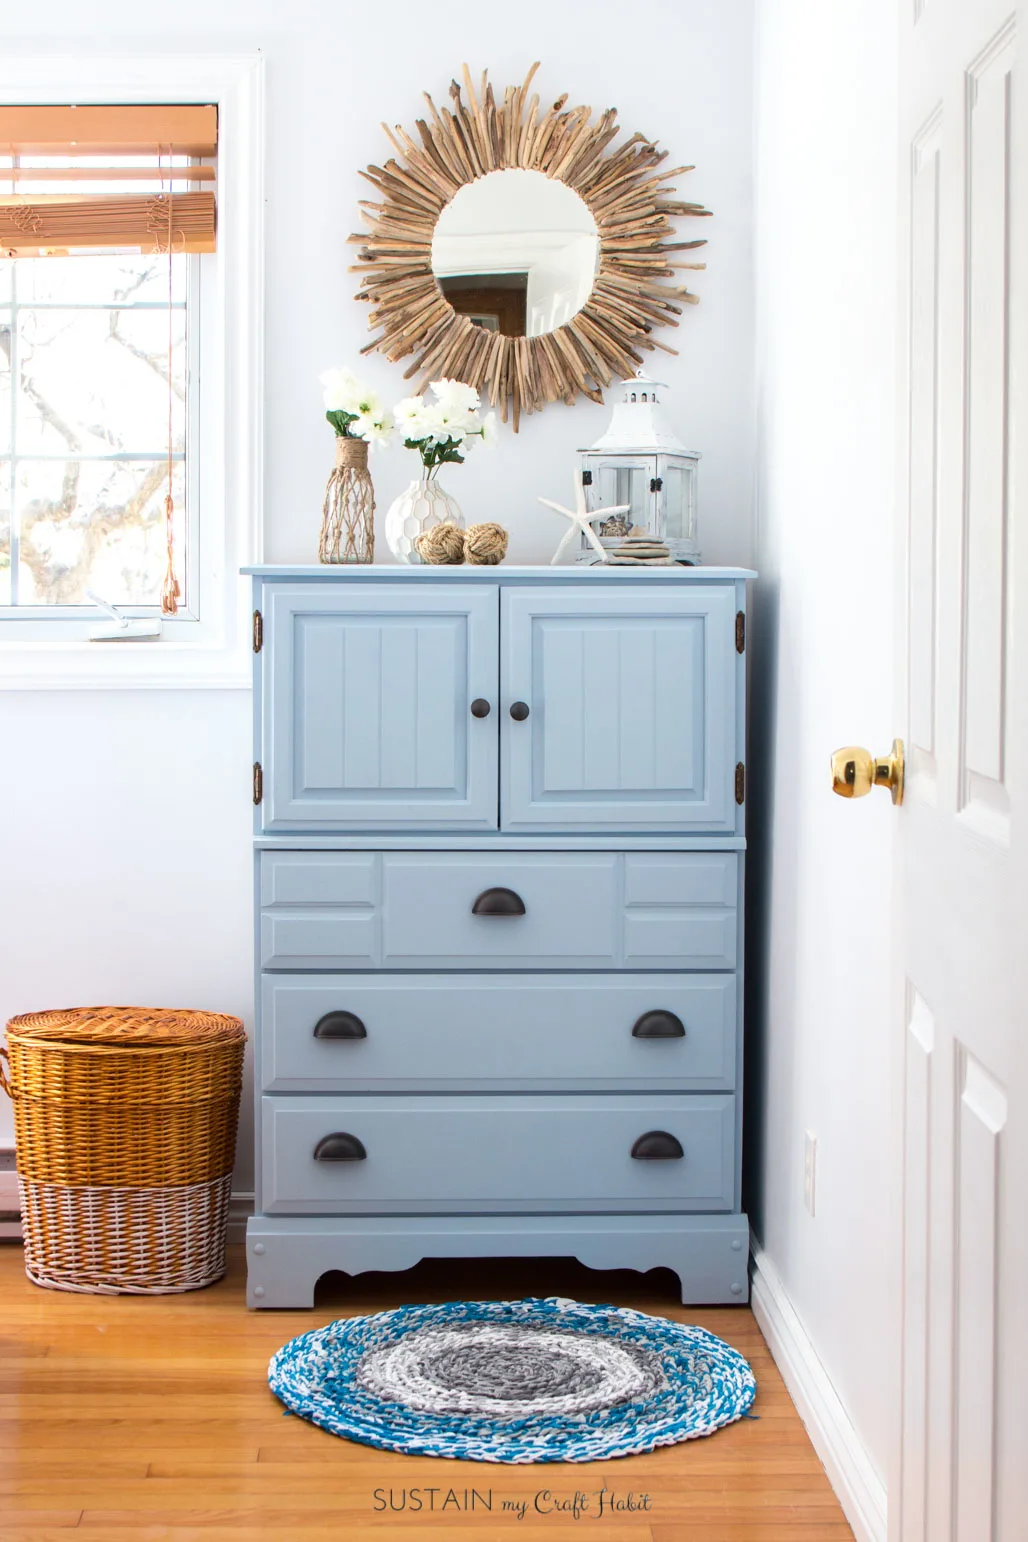 How to Apply Milk Paint on Furniture - Beautiful Vanity Makeover - Designed  Decor